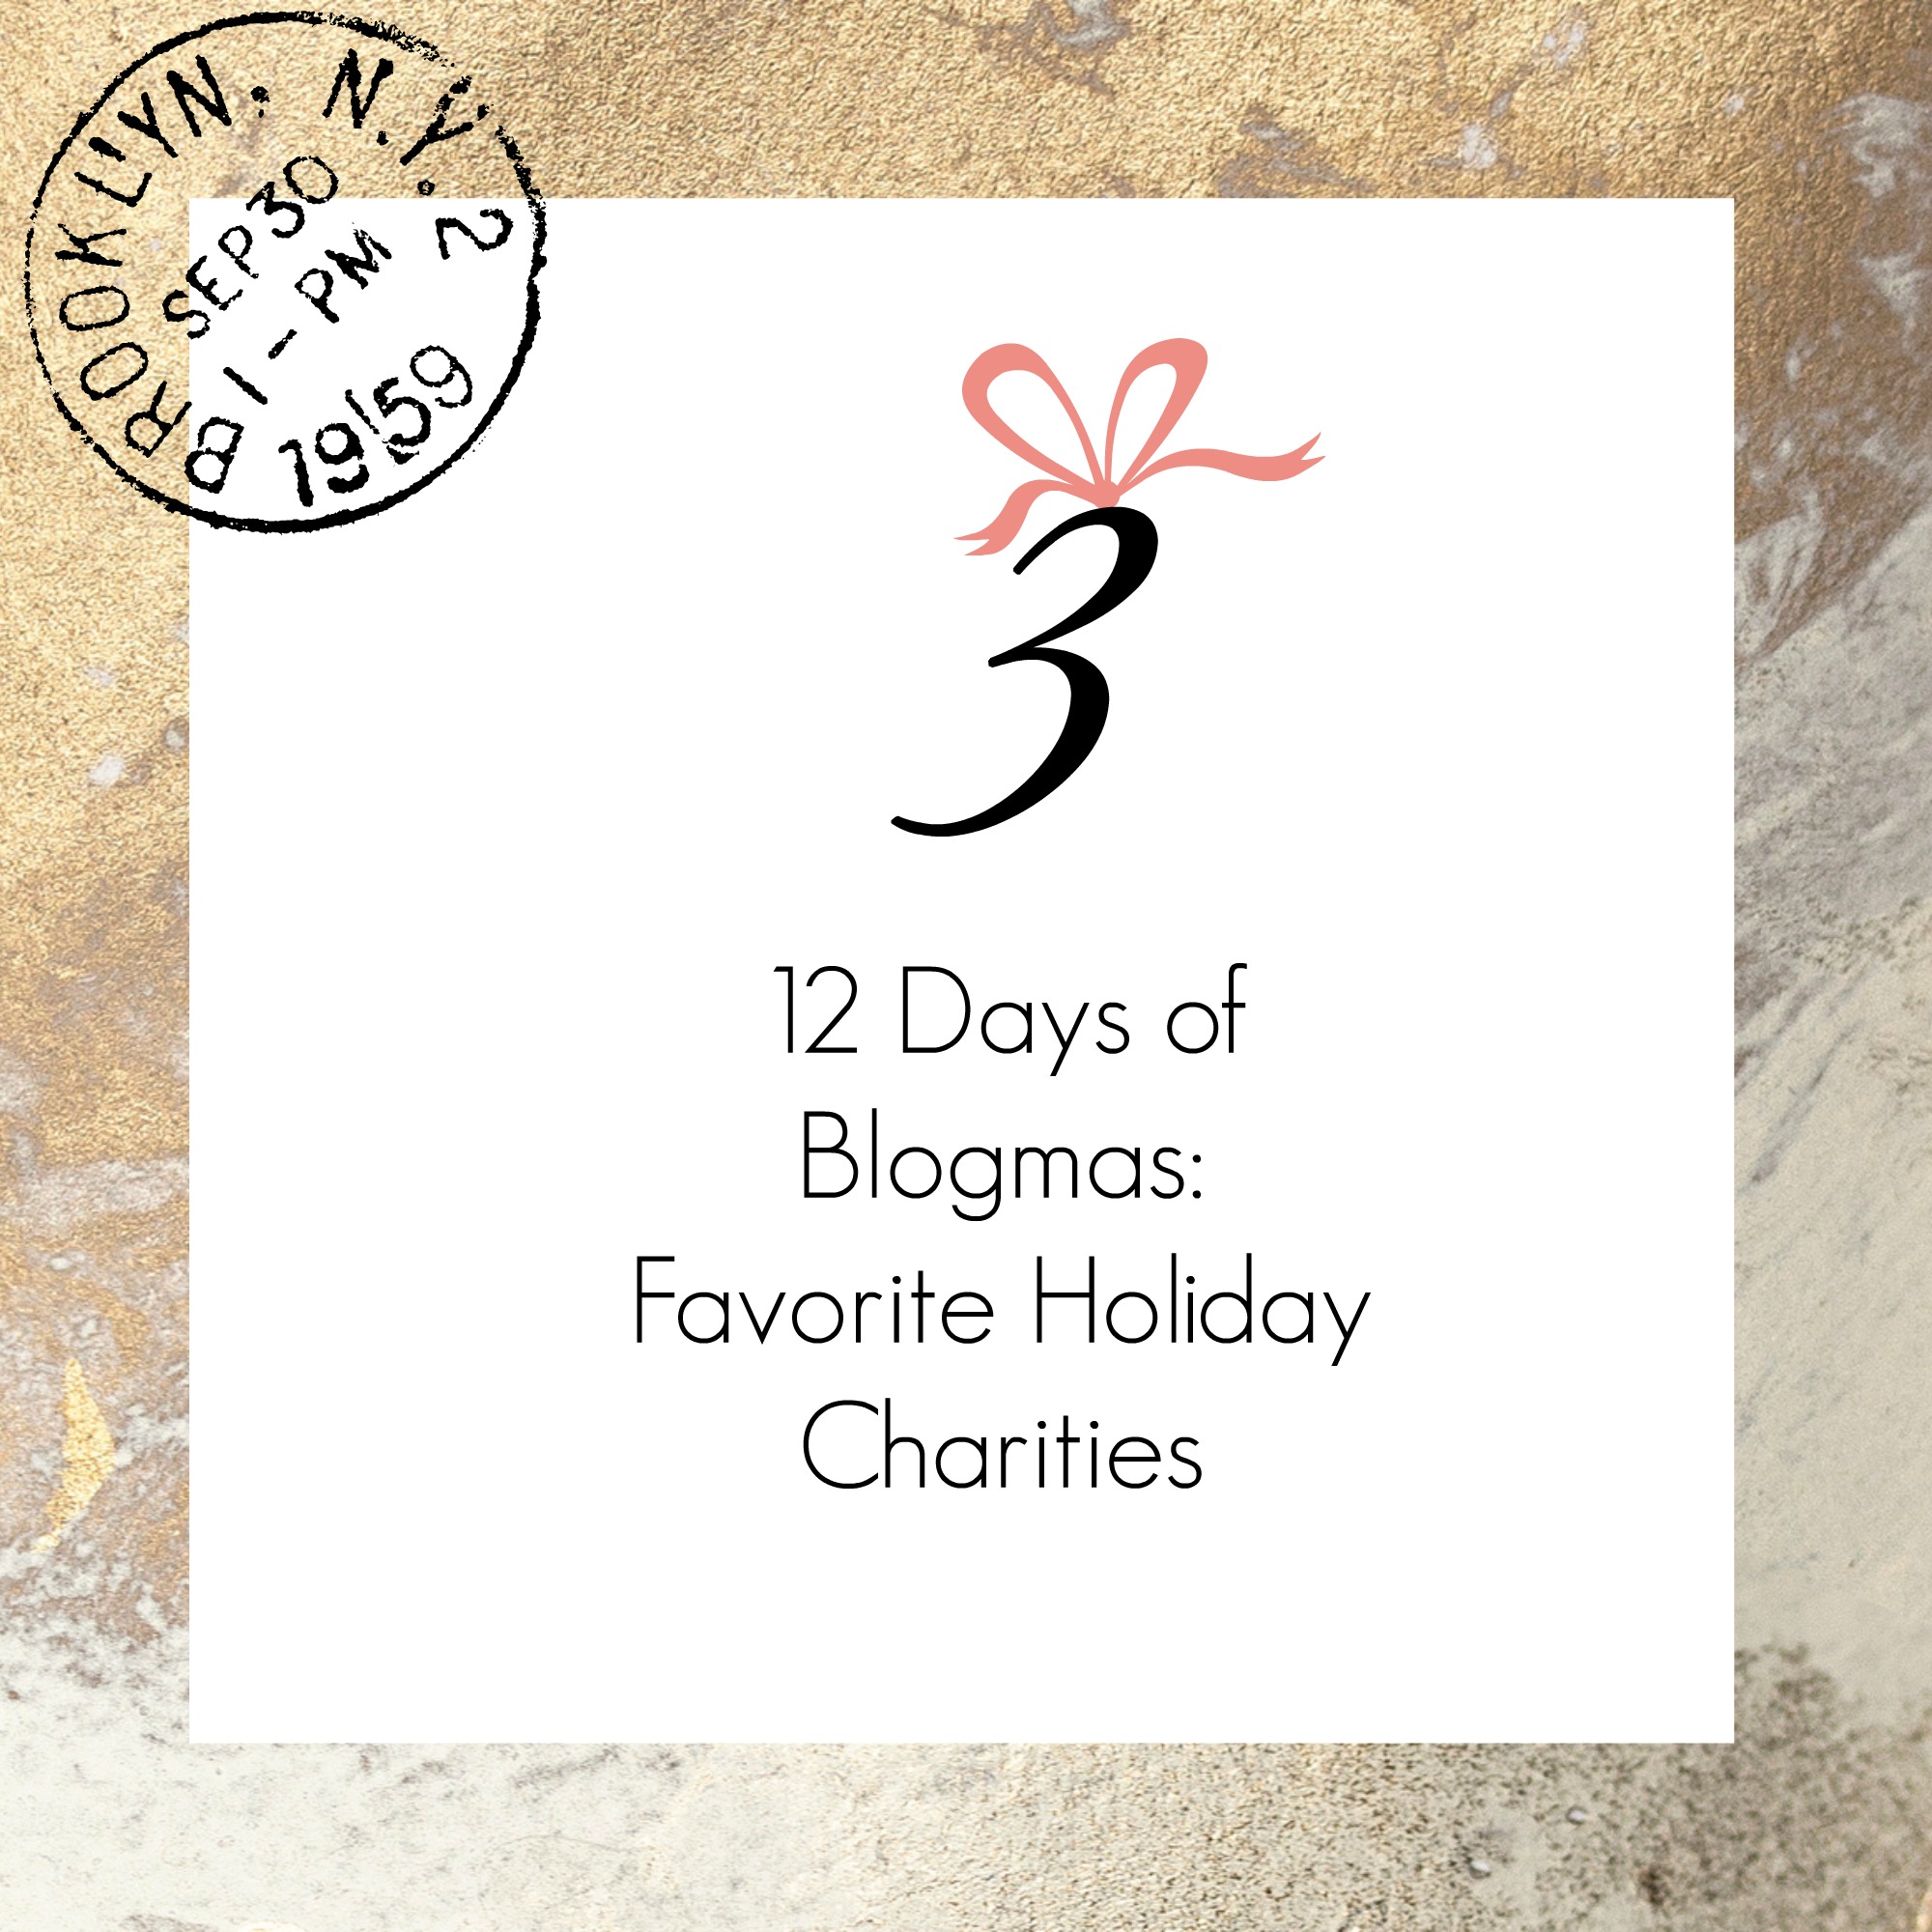 Calgary based blog shares her favorite holiday charities. The third day of Blogmas is all about giving back.